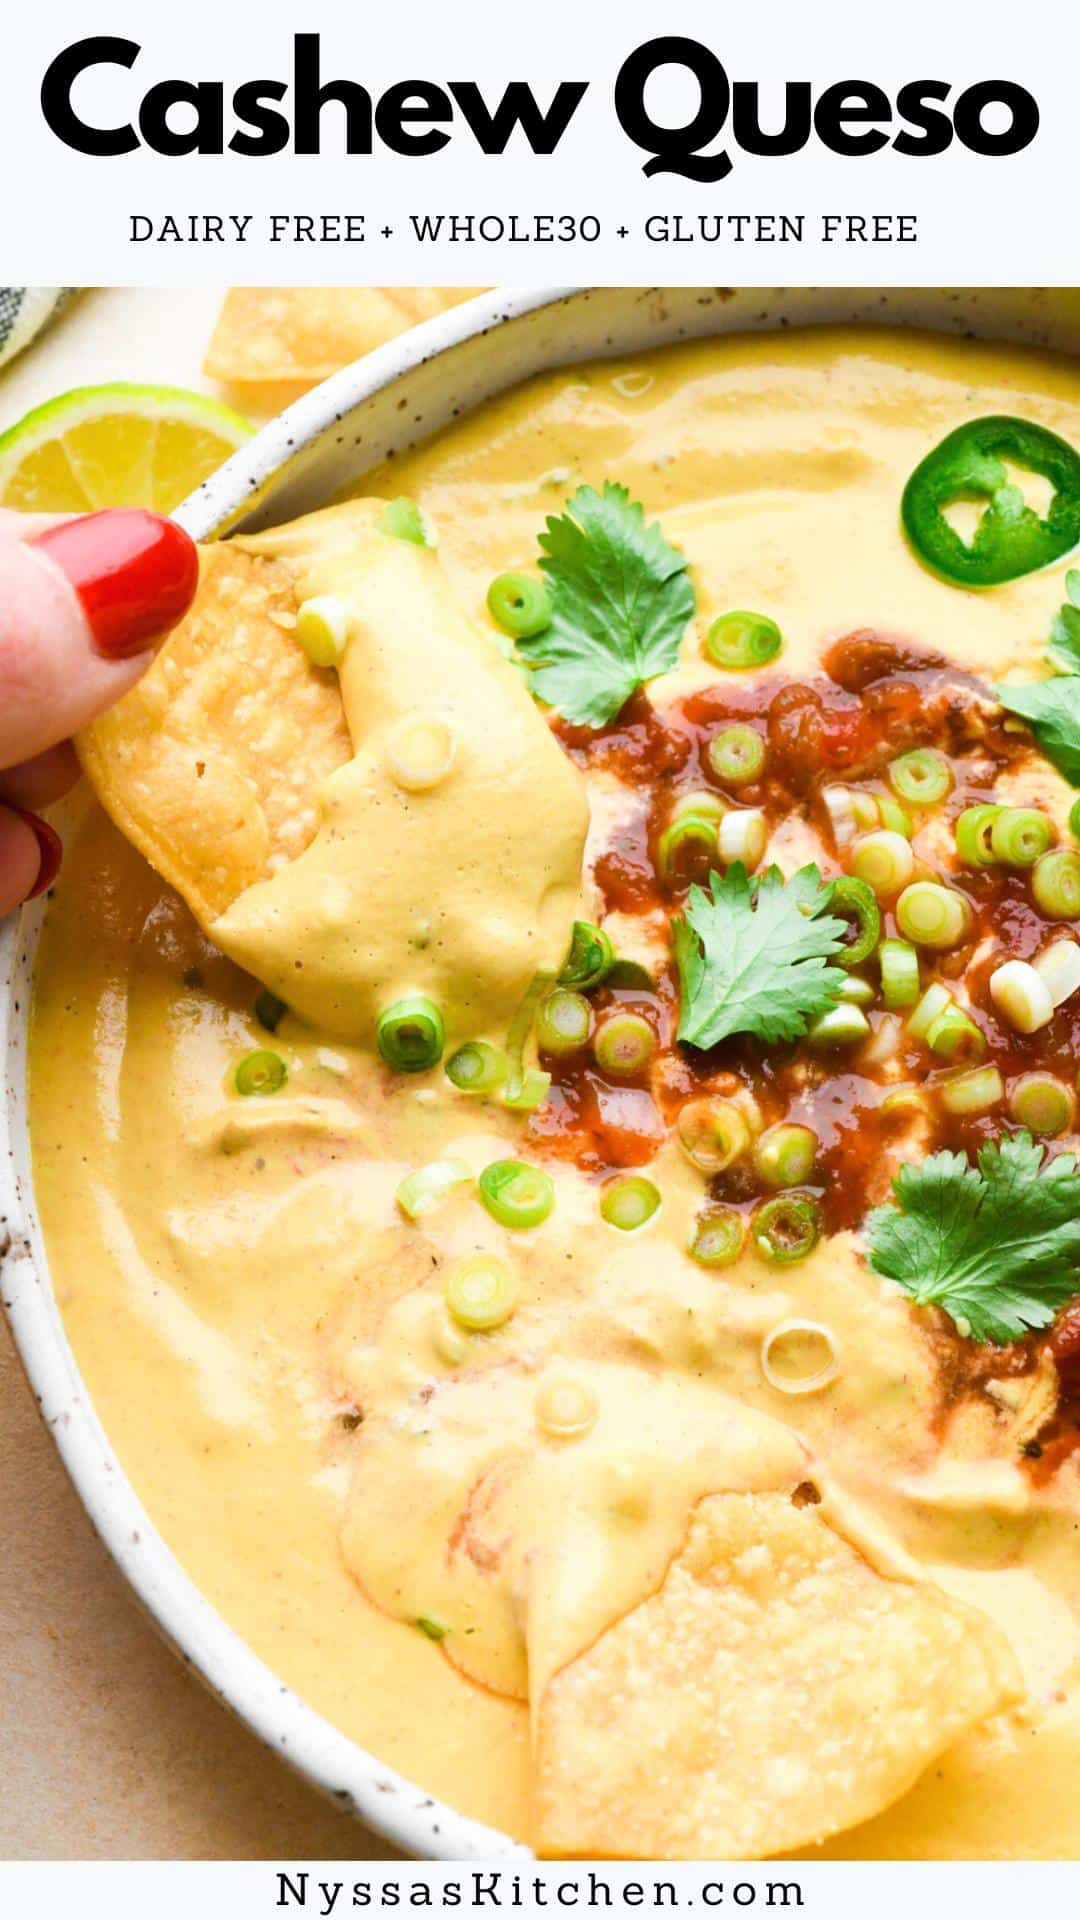 This creamy cashew queso is a delightful plant based recipe that tastes just as good as the real thing! Made with raw cashews, nutritional yeast, lime juice, and your favorite salsa. After soaking the cashews, it comes together in just 5 minutes and is delicious served warm with tortilla chips or as an addition to taco night. It is vegan, gluten free, Whole30 compatible, and paleo friendly, too!